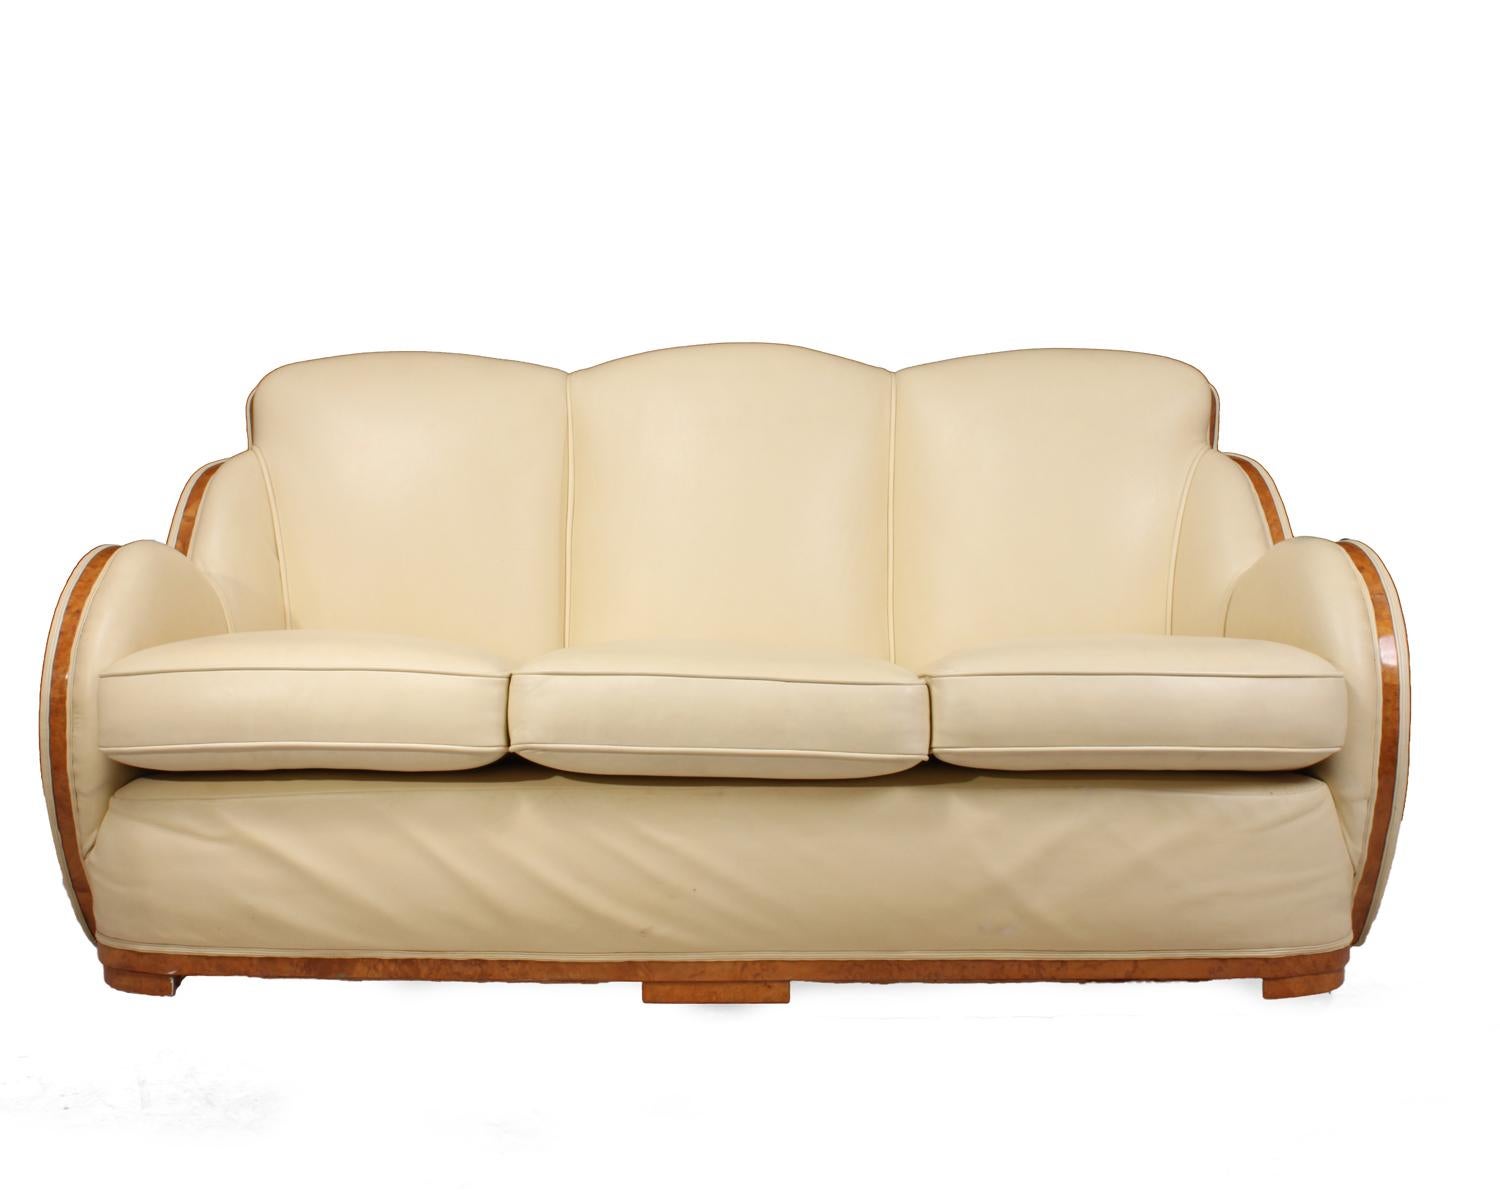 Art Deco burr maple and leather cloud suite by Epstein circa 1930
An Art Deco three piece suite by the well known London makers Harry and Lou Epstien, fully upholstered to a very high standard a few years ago and had very little use the show wood